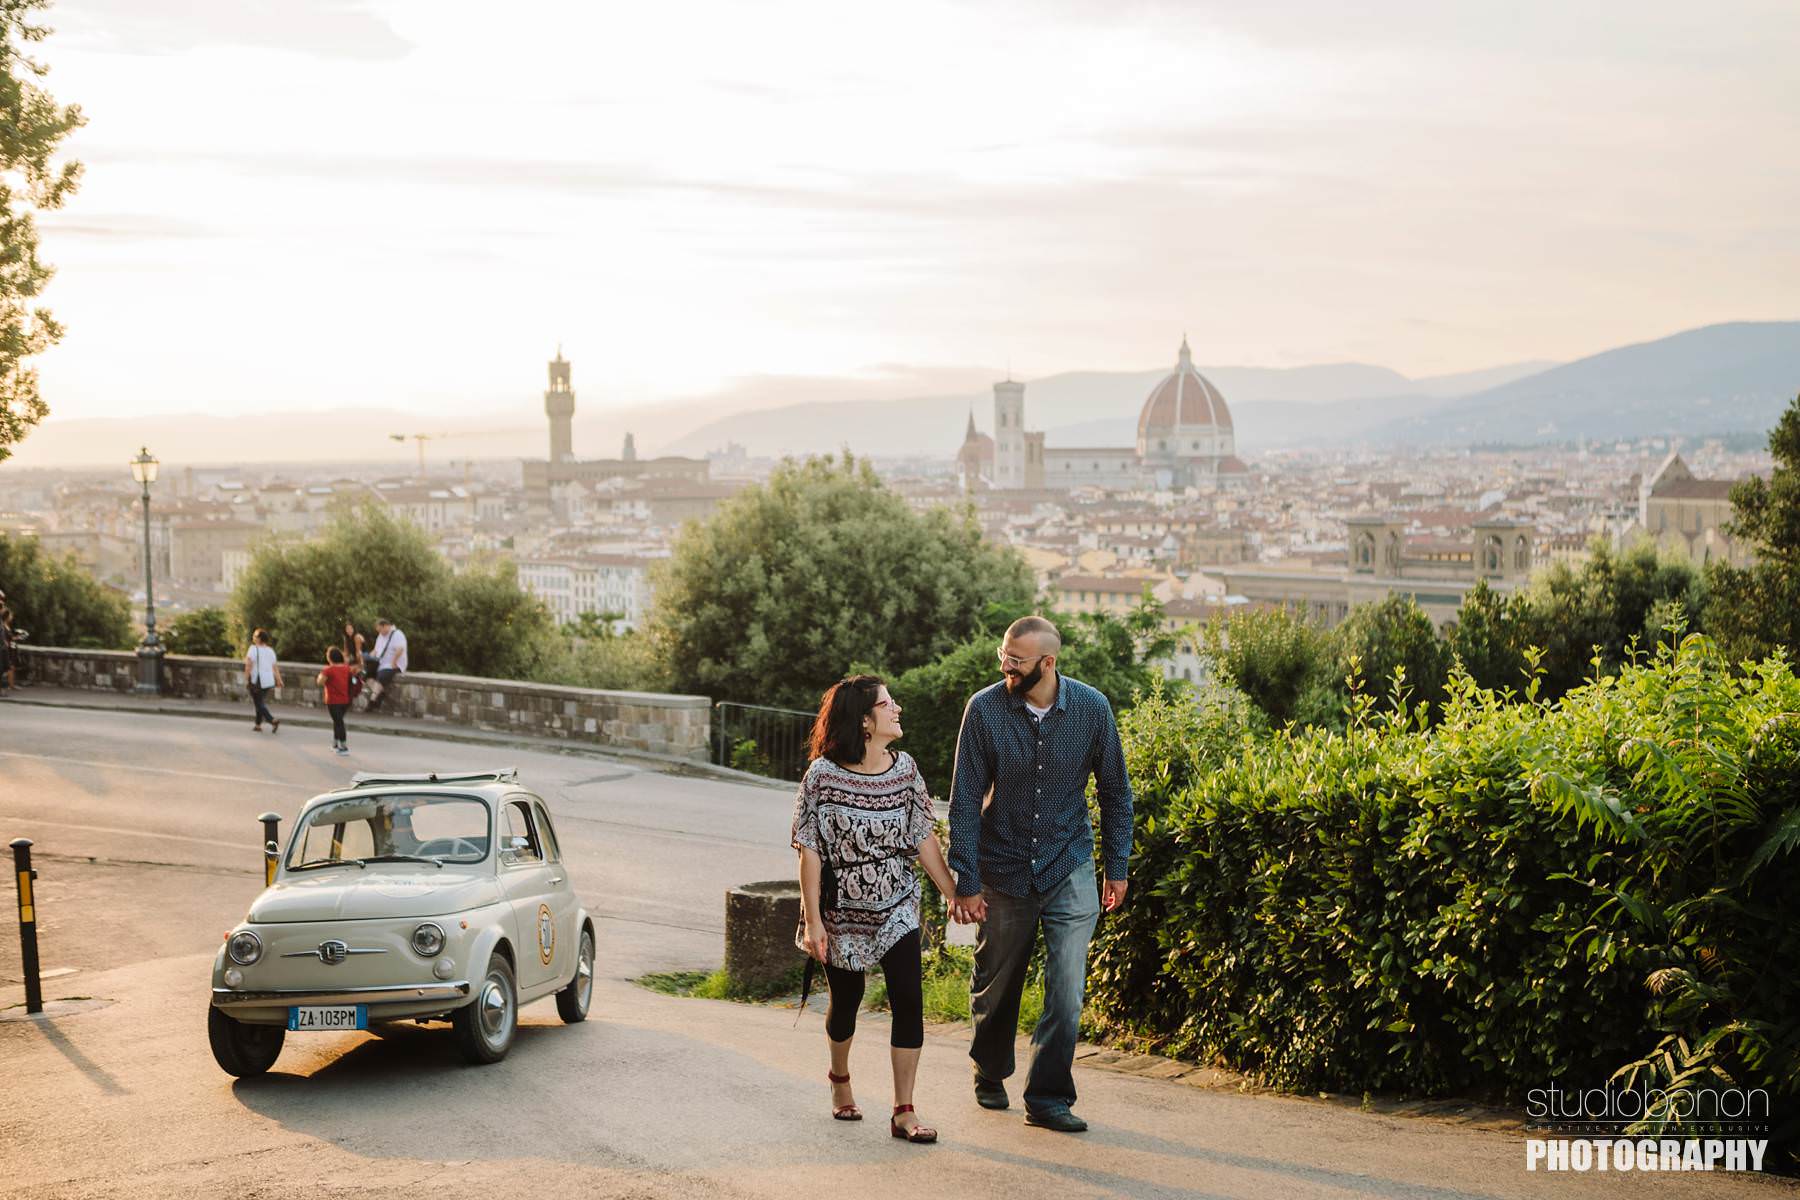 Fiat 500 tour in Florence: your authentic Italian experience!